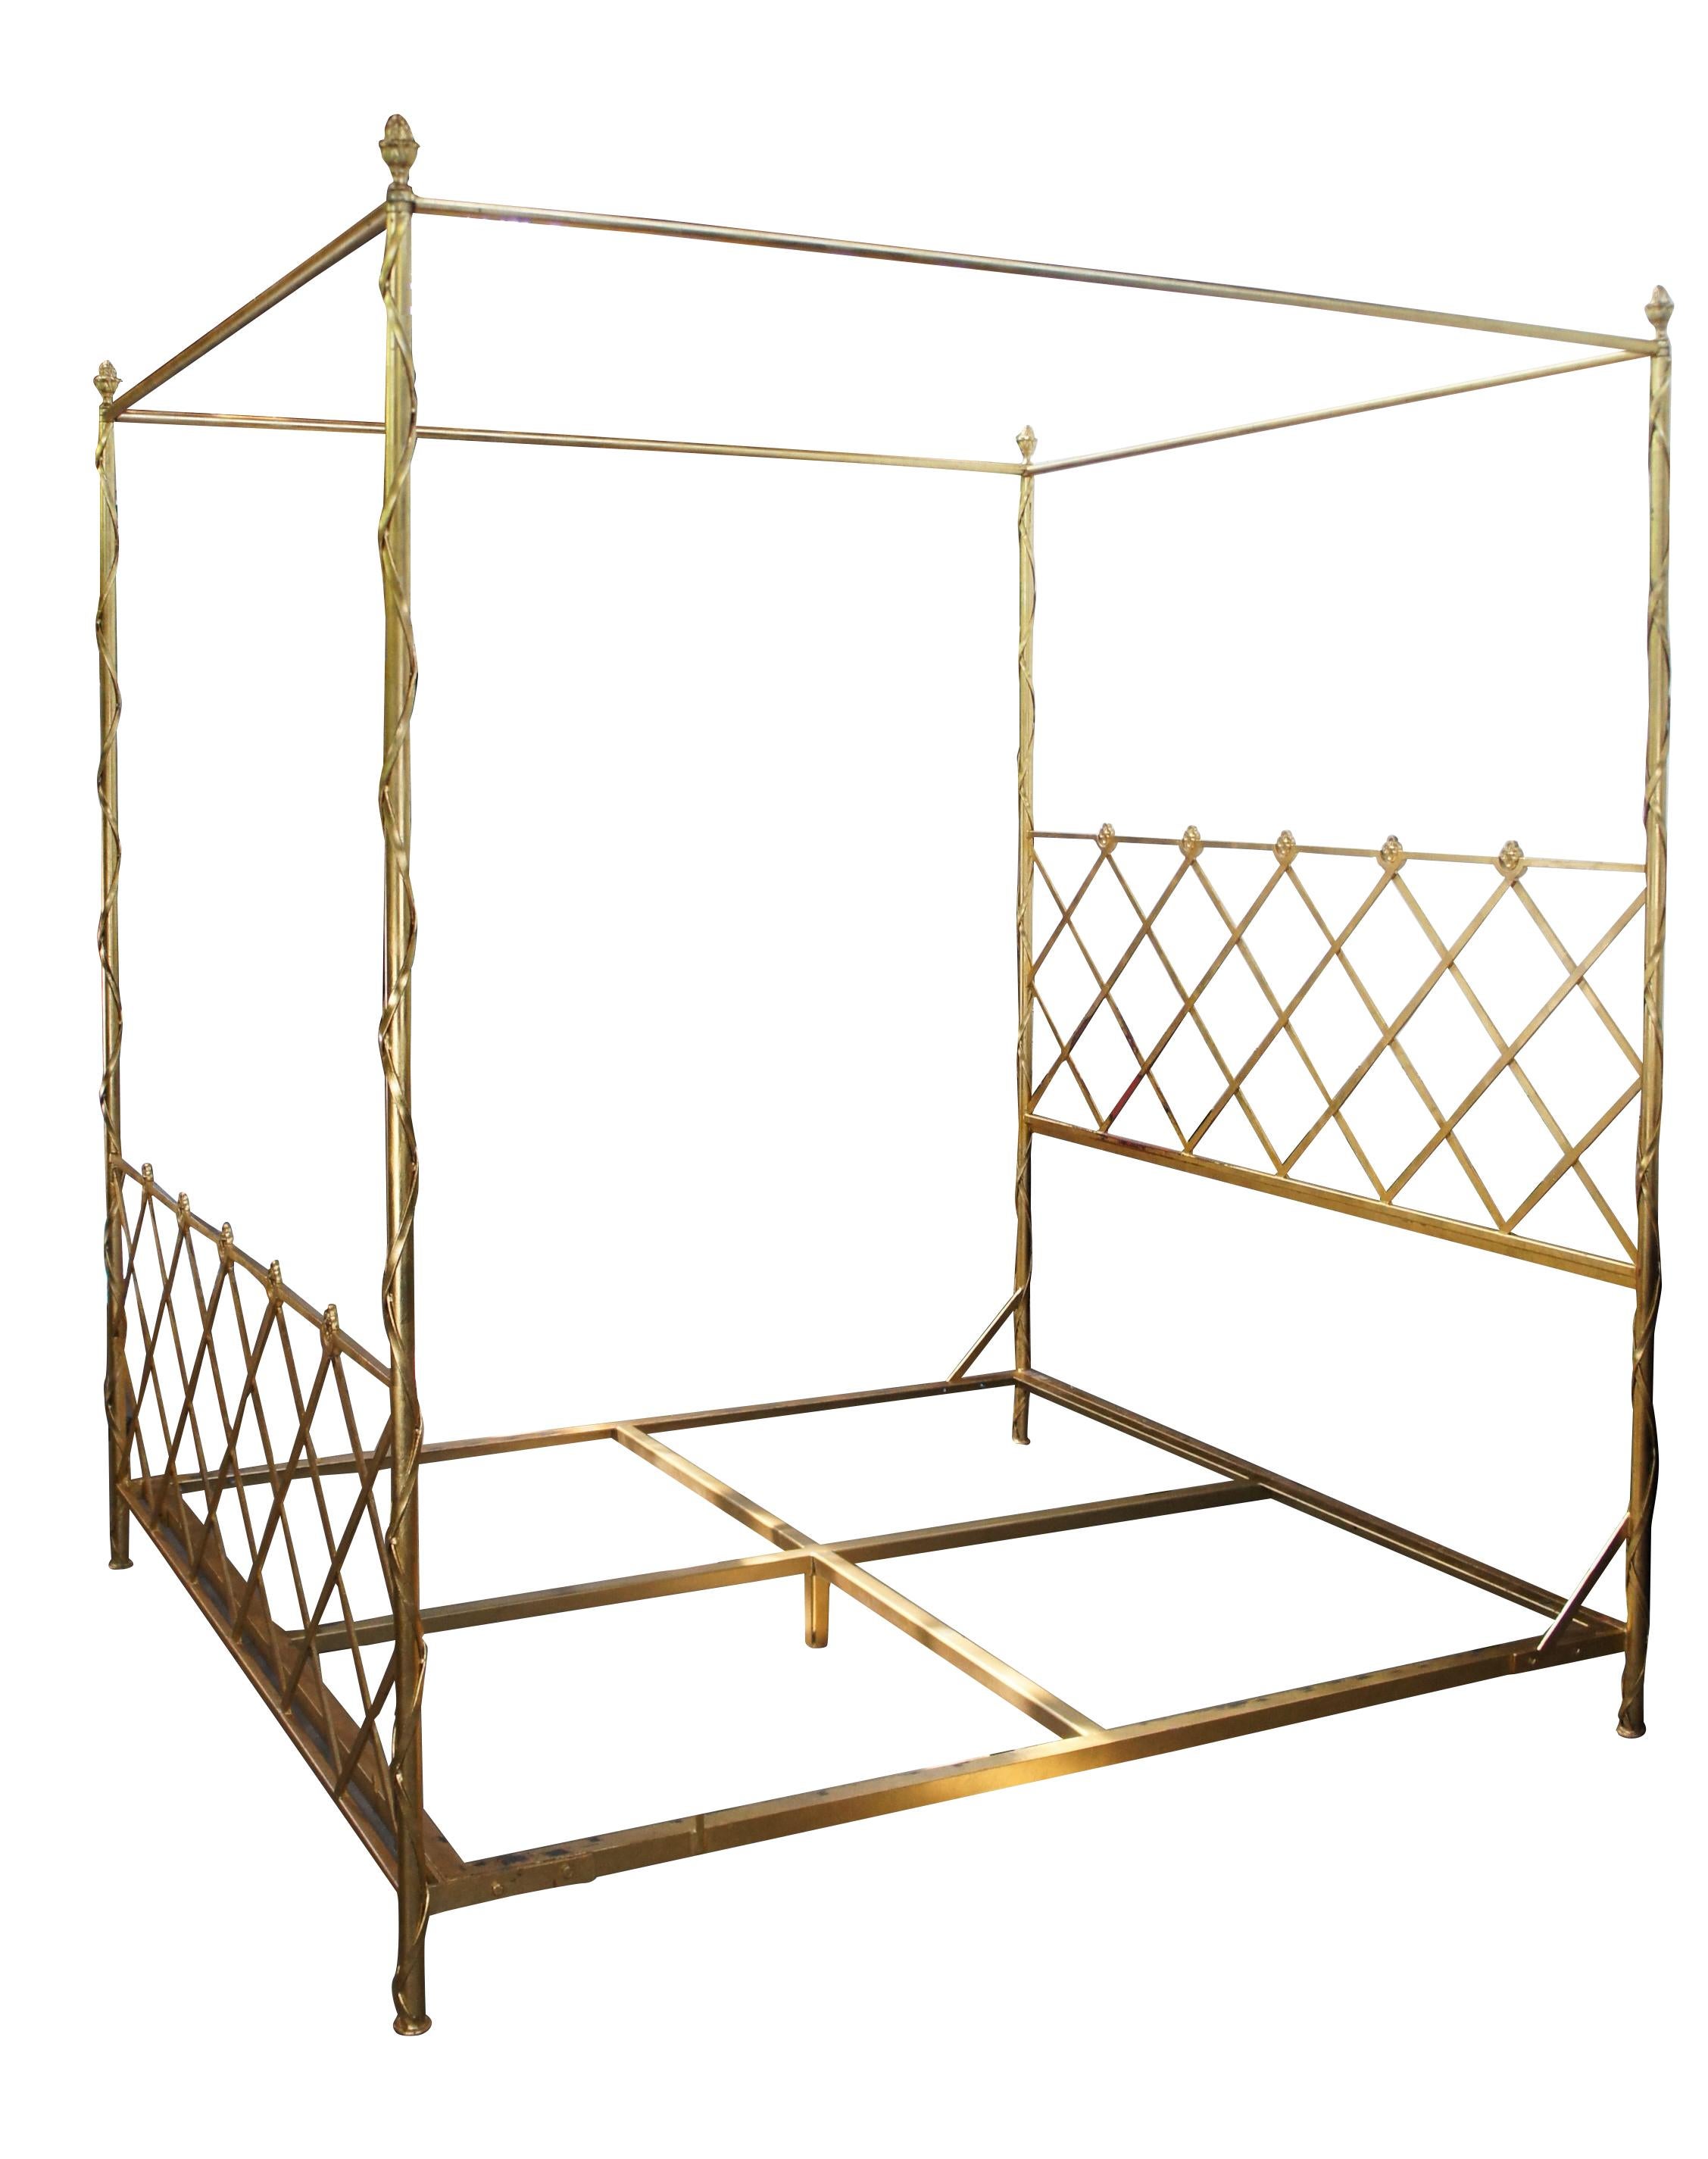 Vintage Neoclassical Modern Gold Leaf King Size Poster Bed Lattice Tester Canopy In Good Condition For Sale In Dayton, OH